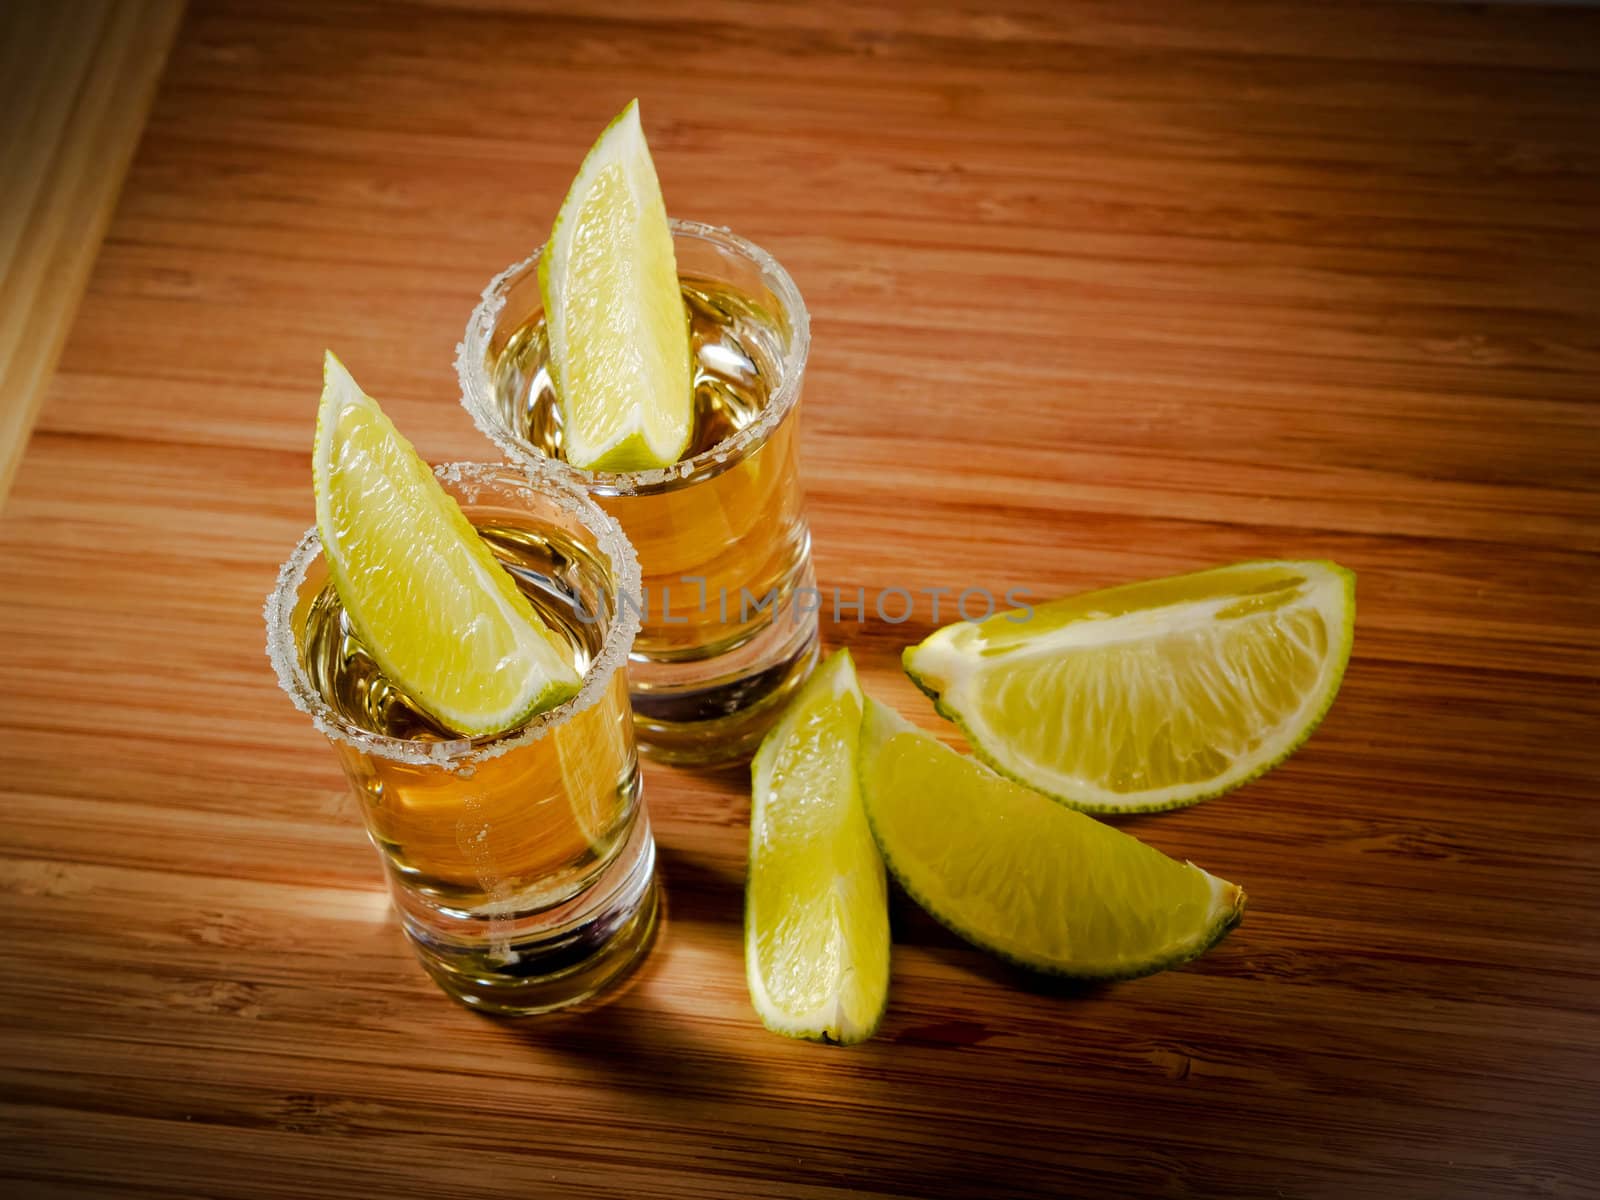 Two tequila shots with salt rims and lime wedges